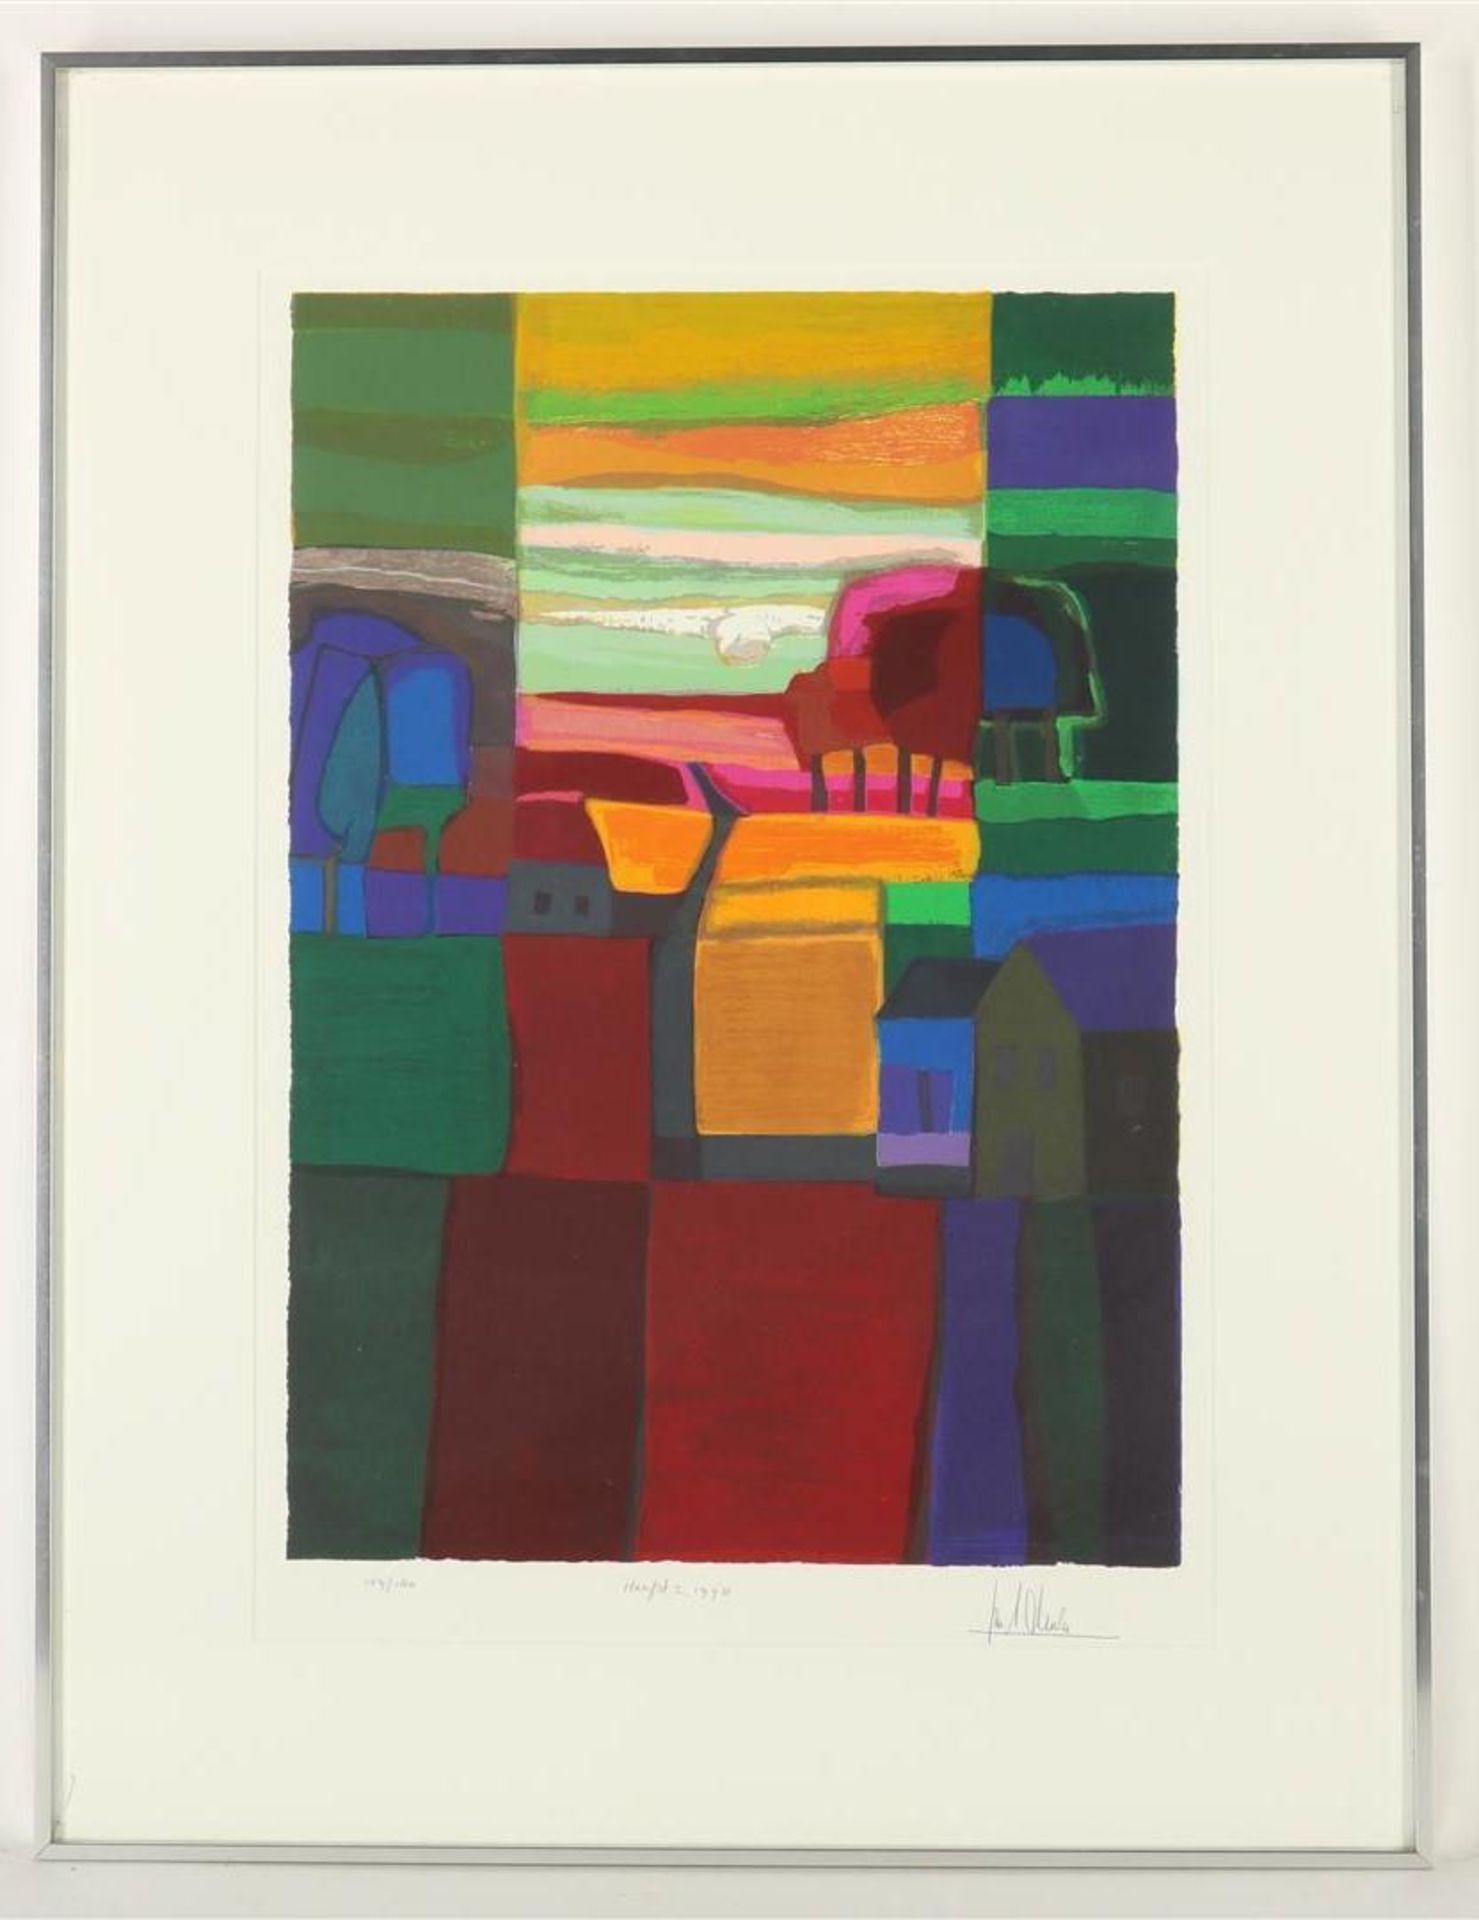 Ton Schulten (1938-) Autumn I 1998, signed lower right, numbered 157/180 lower right, screen print - Image 2 of 4